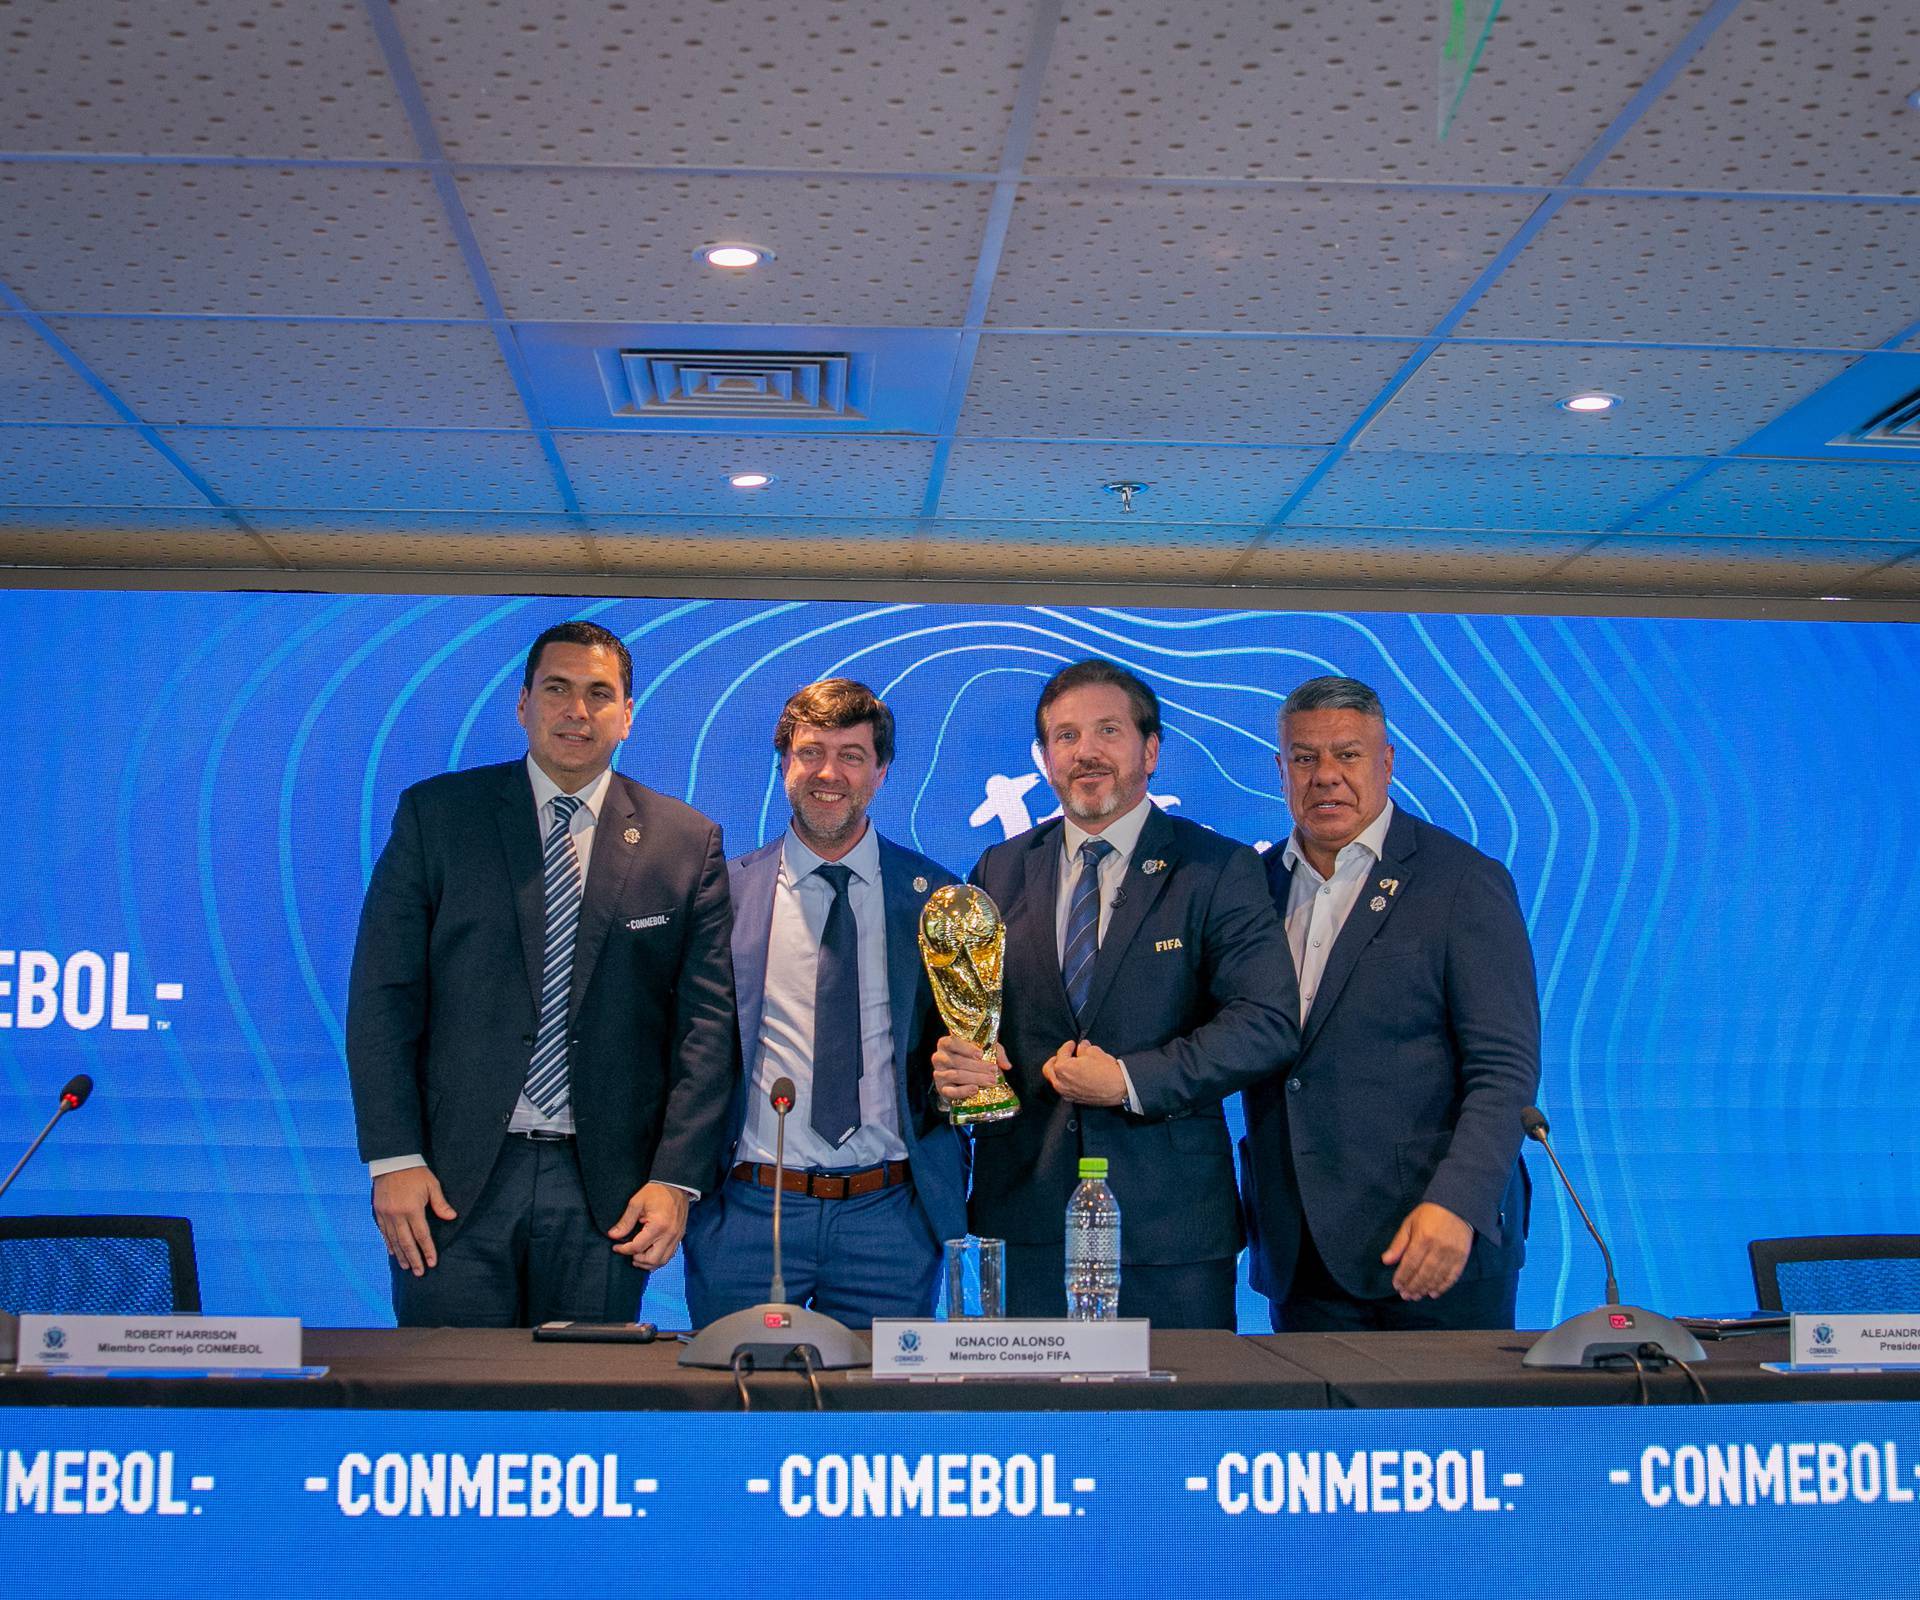 Uruguay, Argentina, Paraguay to host inaugural matches of 2030 World Cup, says Conmebol